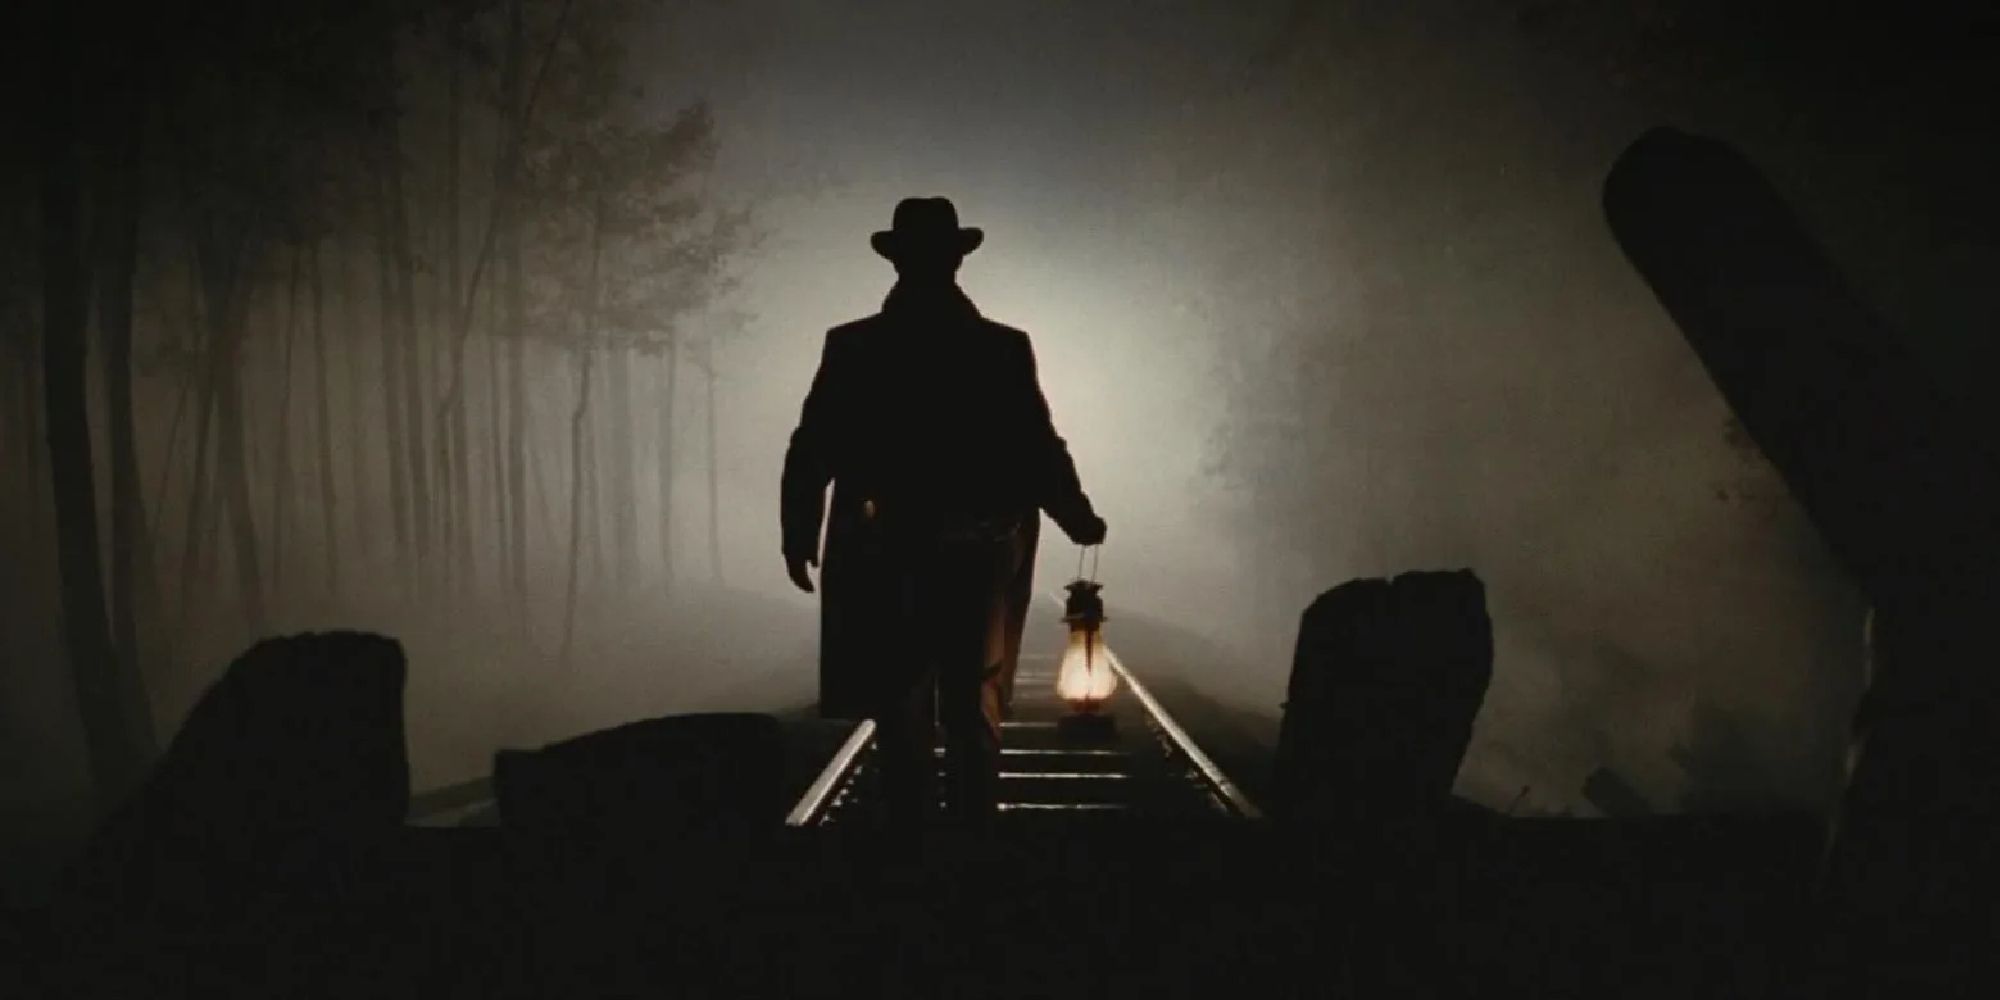 A man holding a lamp while walking in the middle of train tracks in The Assassination of Jesse James